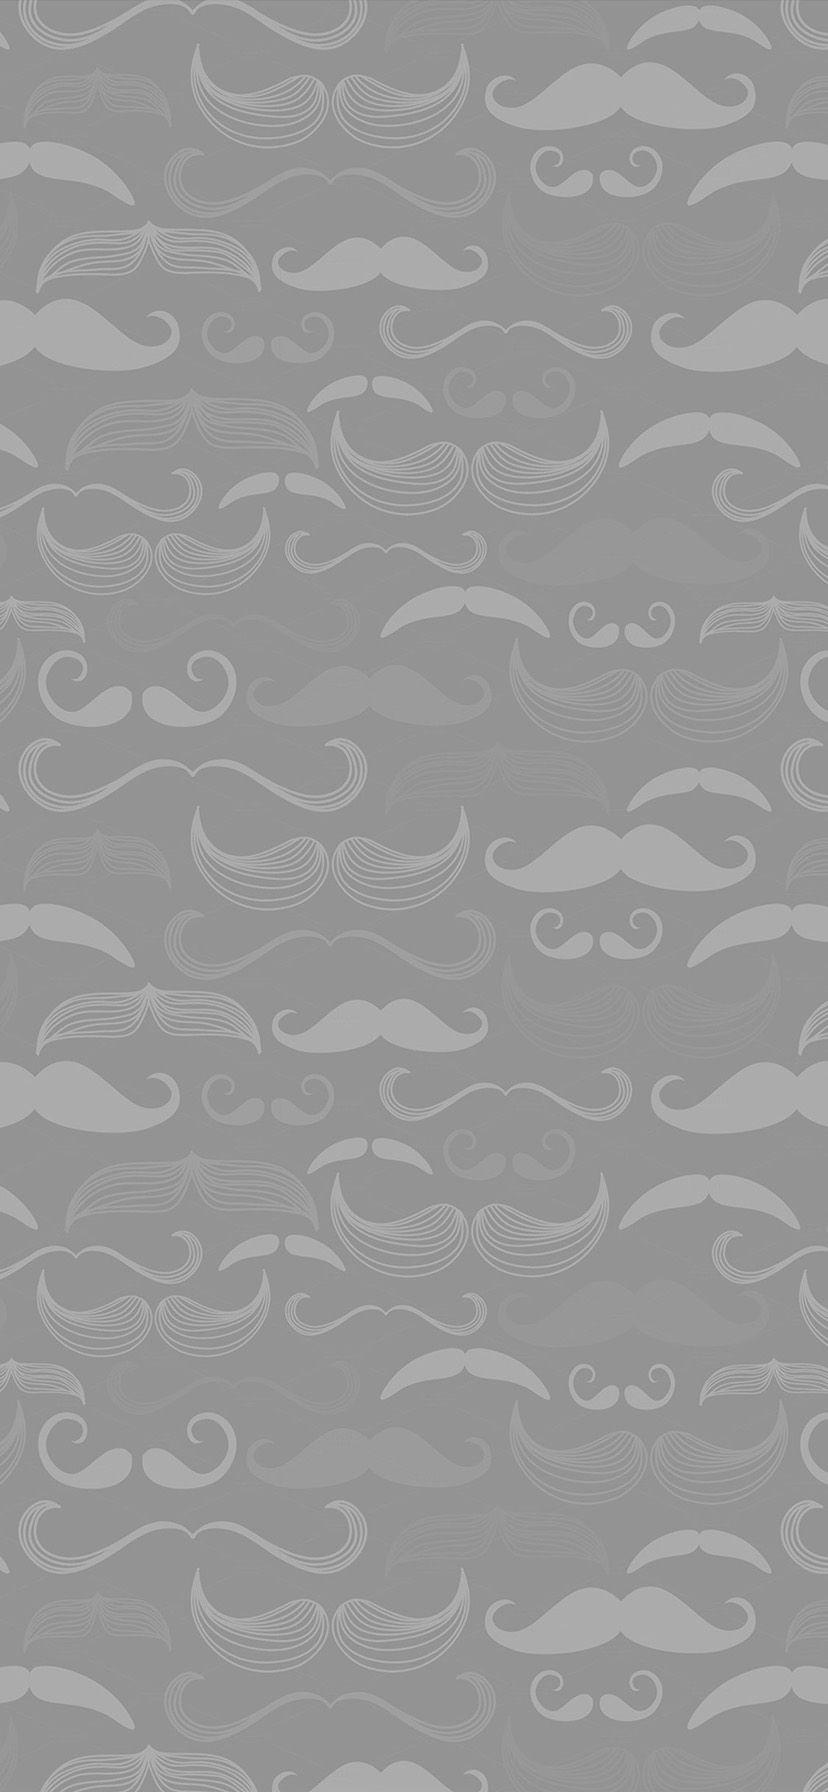 HD iPhone XR Wallpapers For ve73 hipster moustache cute light hazy